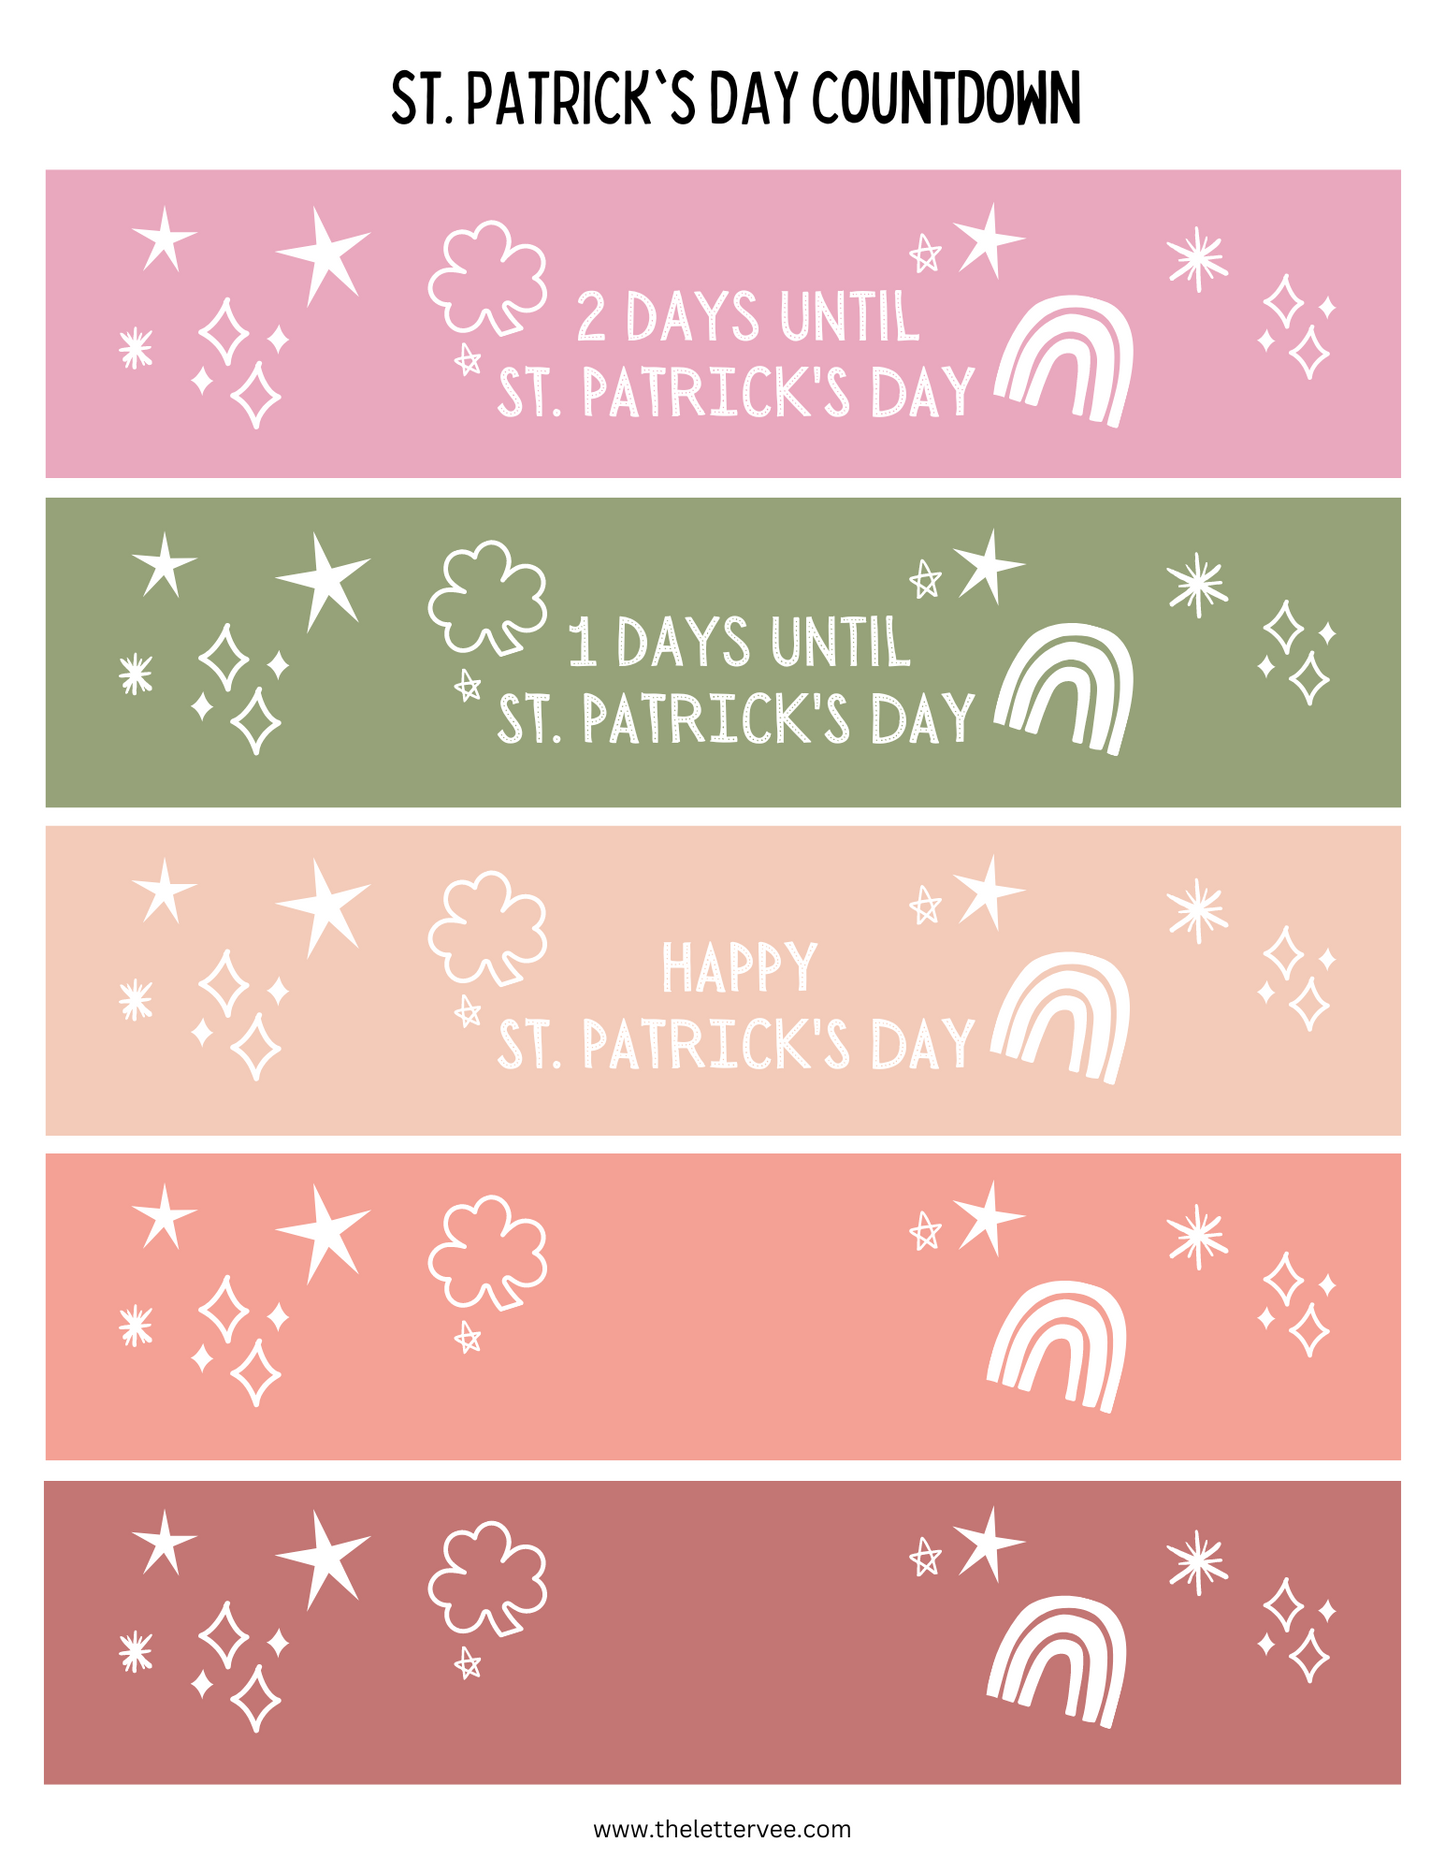 Paper Chain Countdown | St. Patrick's Day